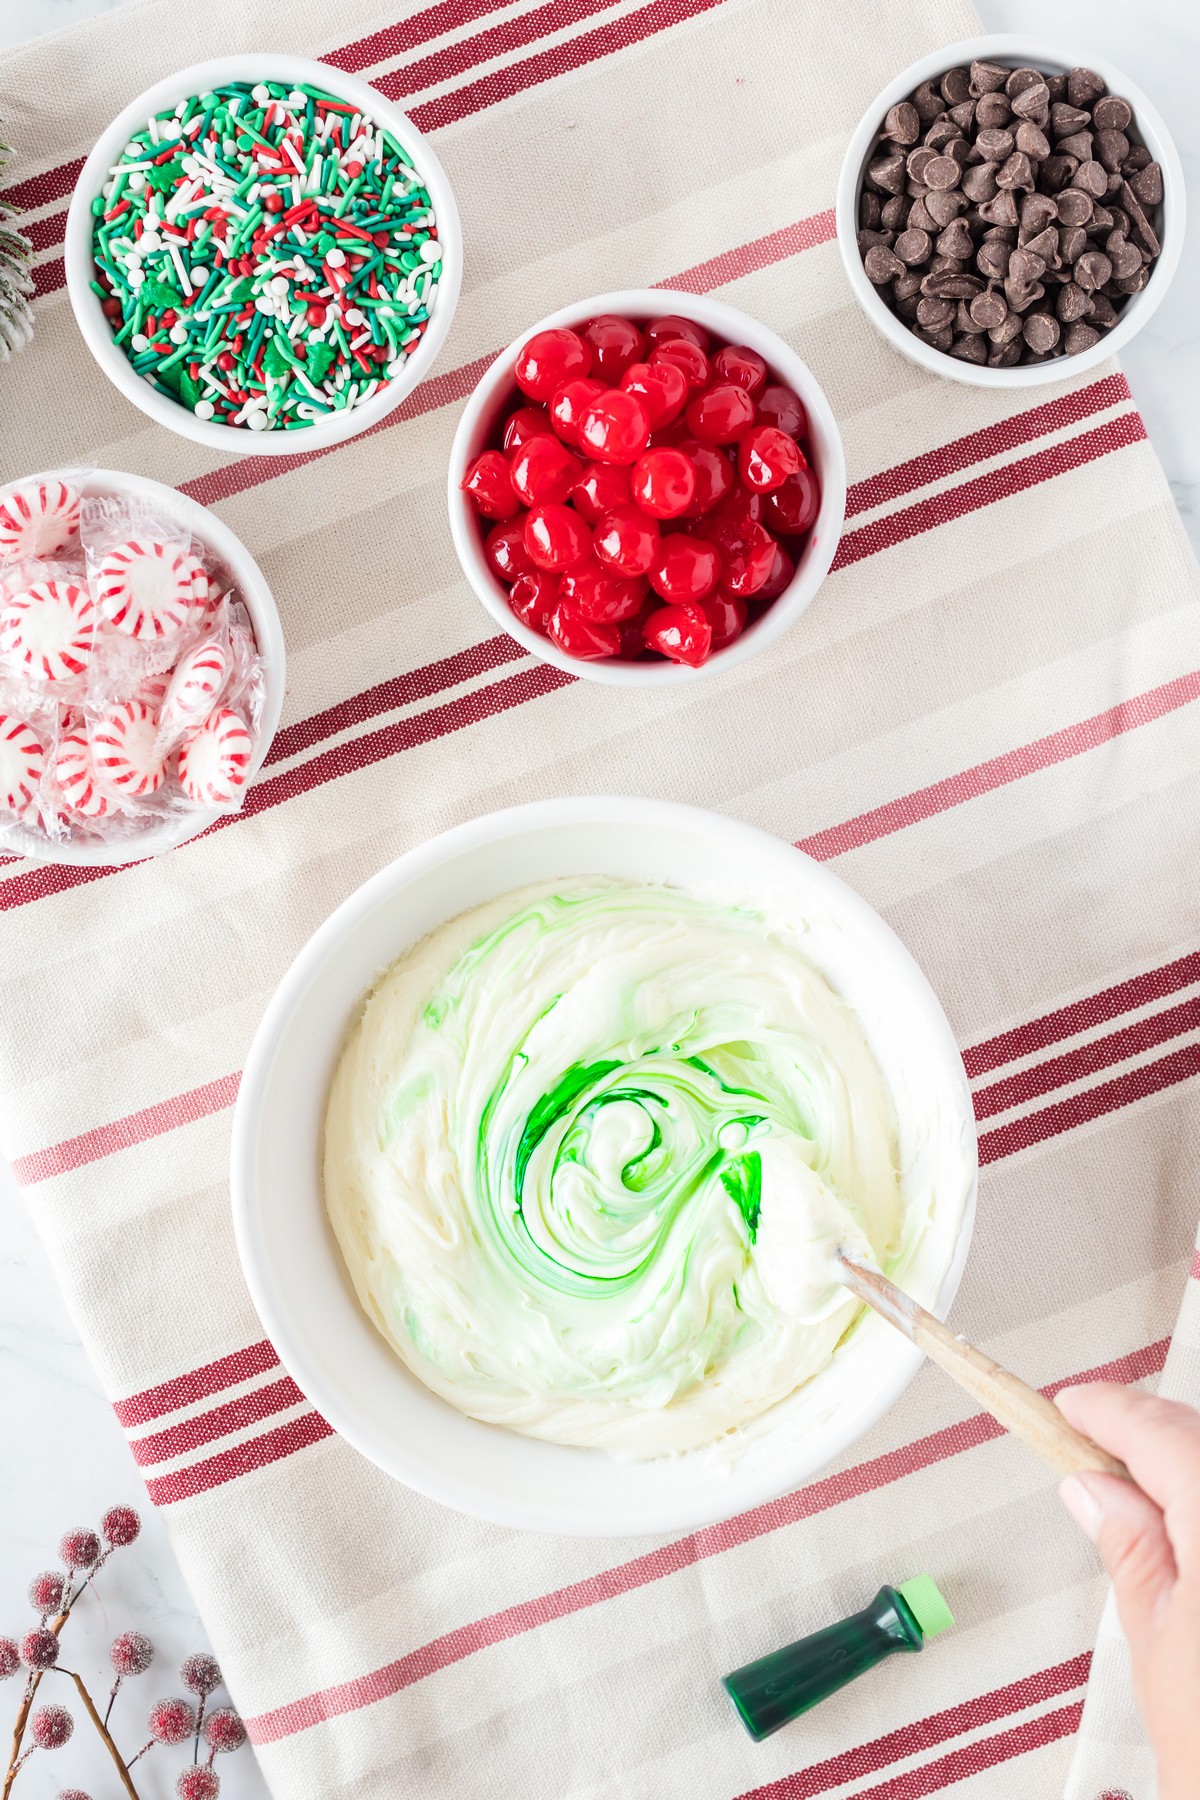 https://www.southerncravings.com/wp-content/uploads/2022/10/Christmas-Tree-Cake-5.jpg